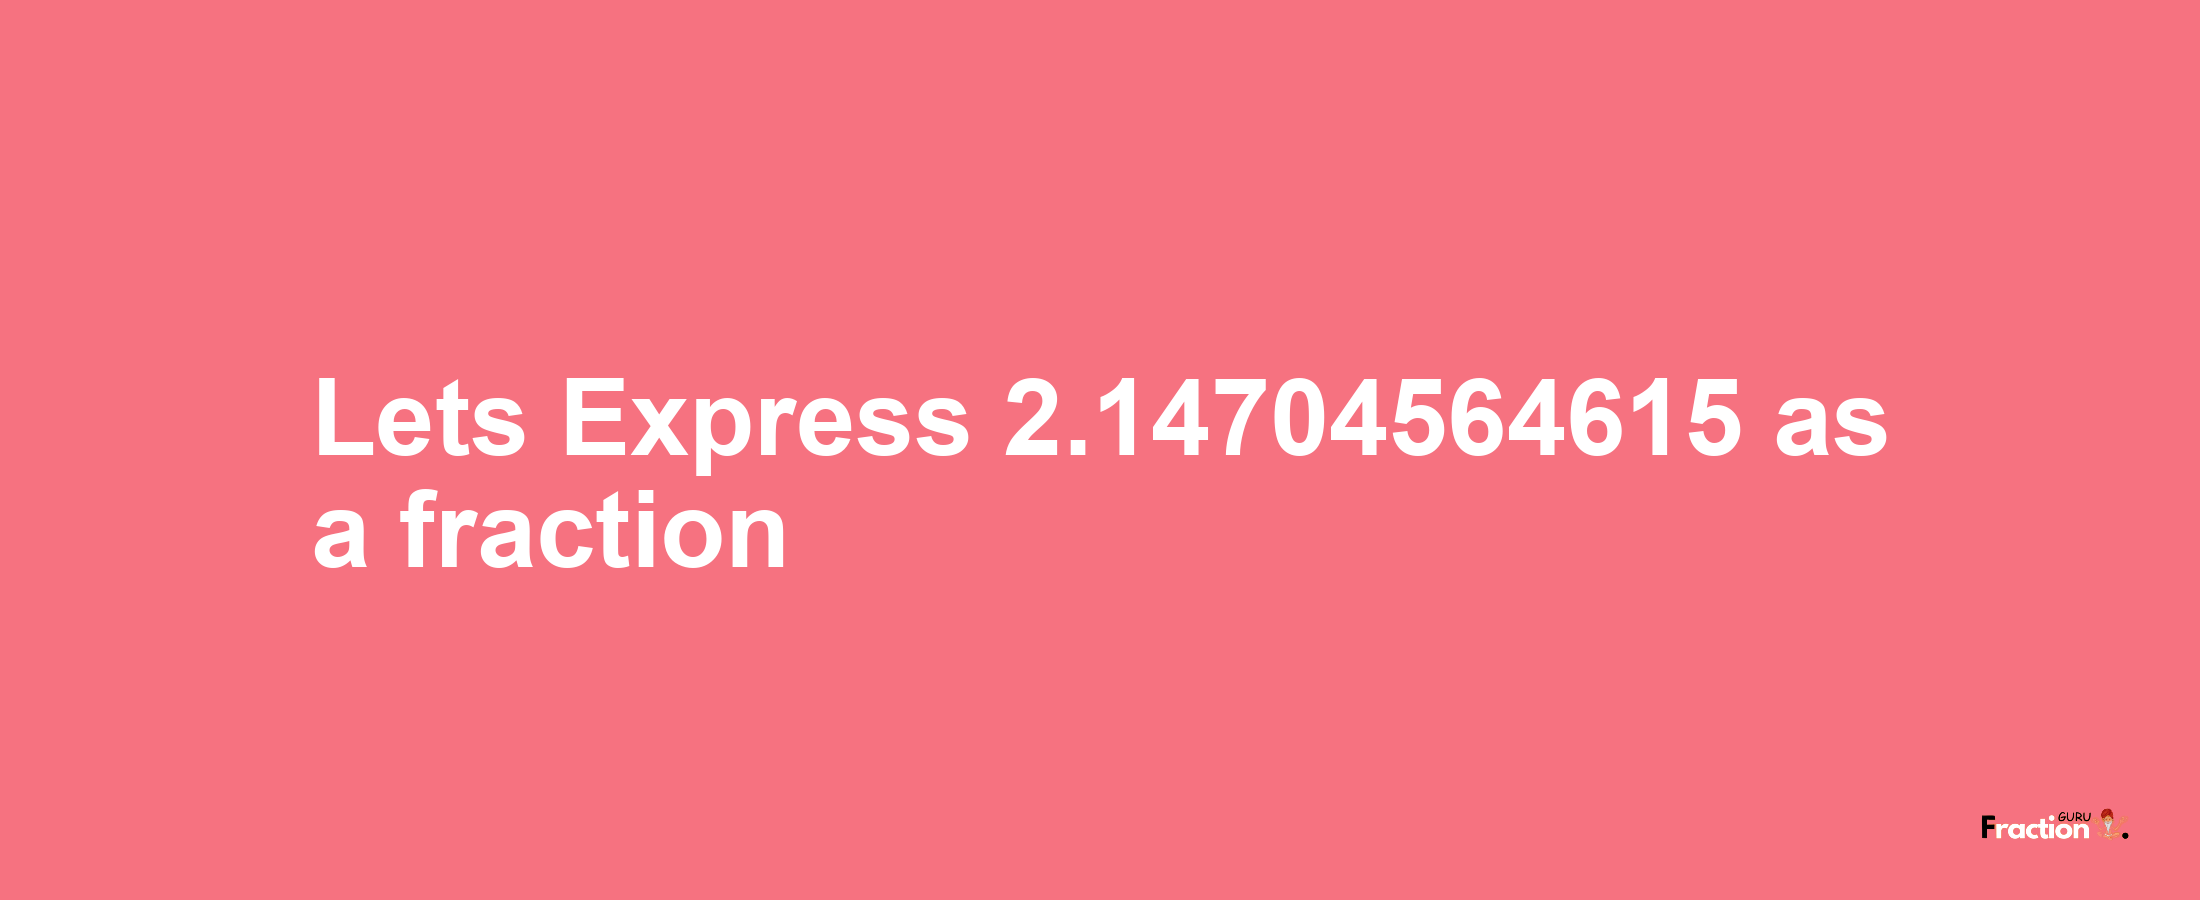 Lets Express 2.14704564615 as afraction